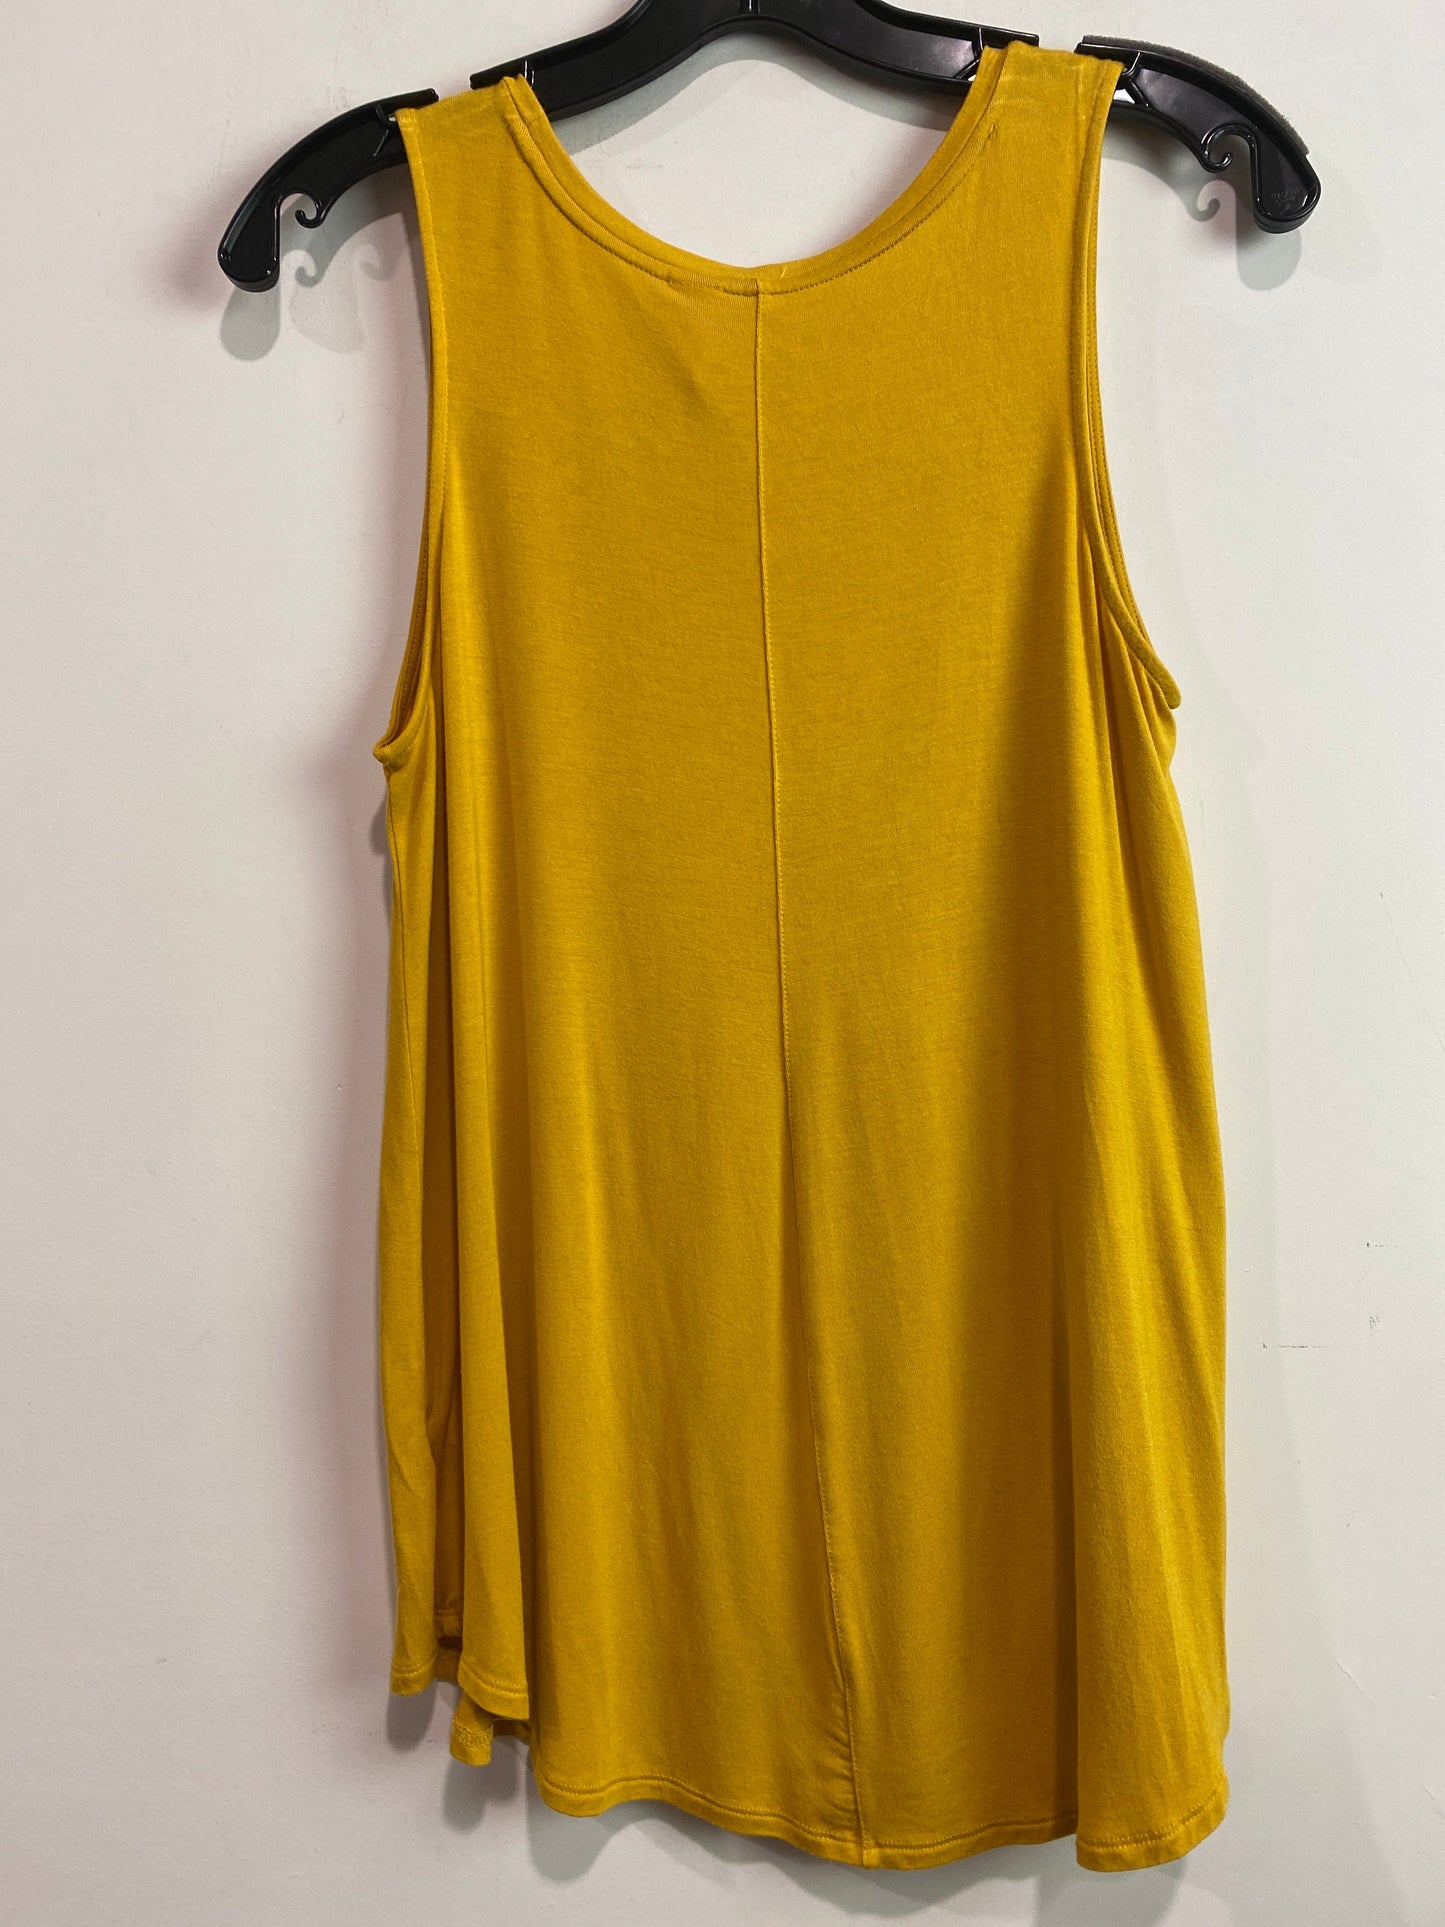 Yellow Tank Top Old Navy, Size S